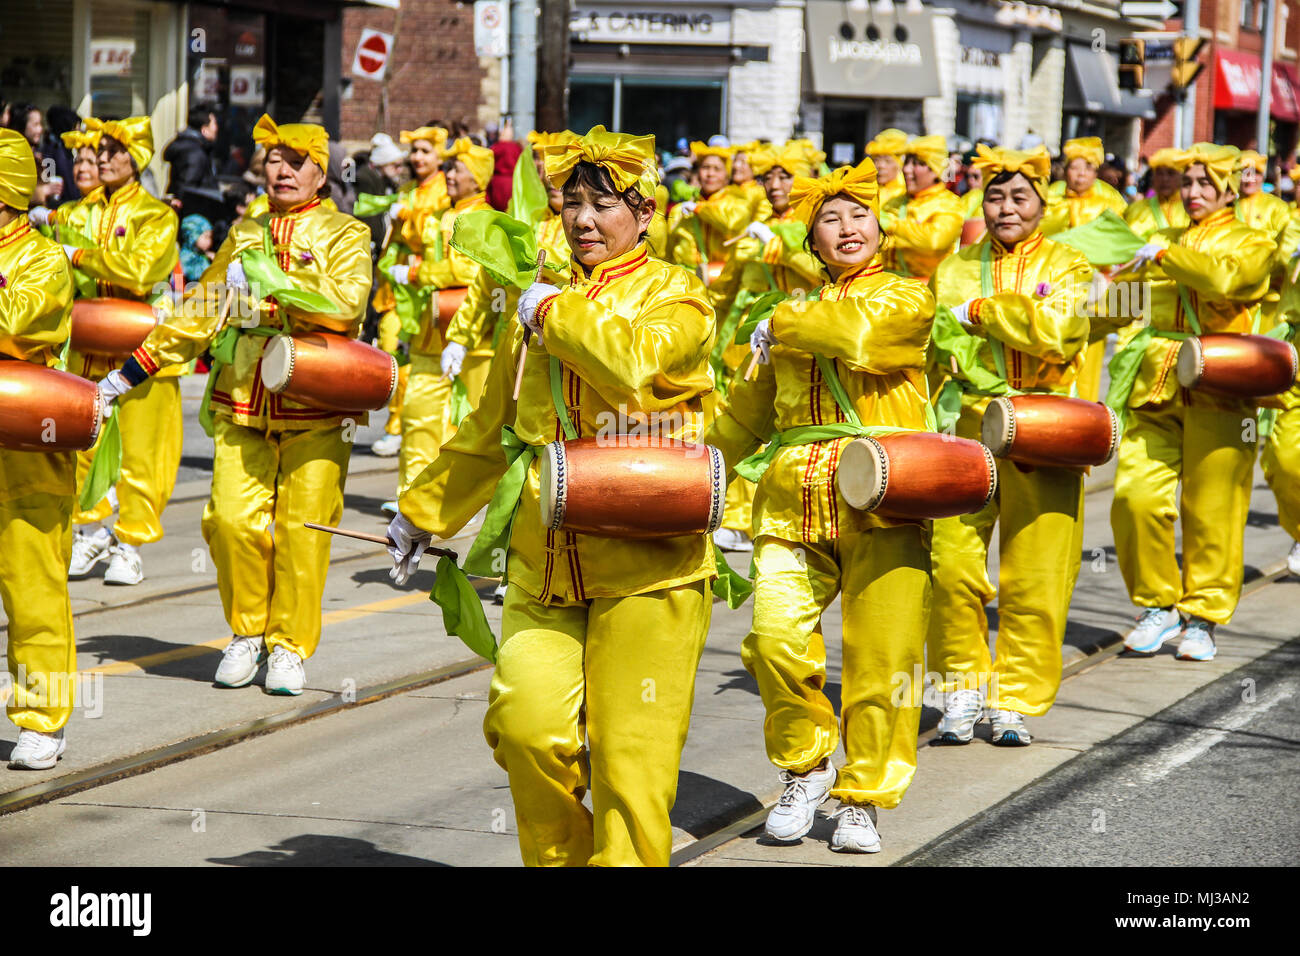 Easter Parade in Toronto, 2018, Chinese Community, Women in Yellow Costumes Playing Drums Stock Photo